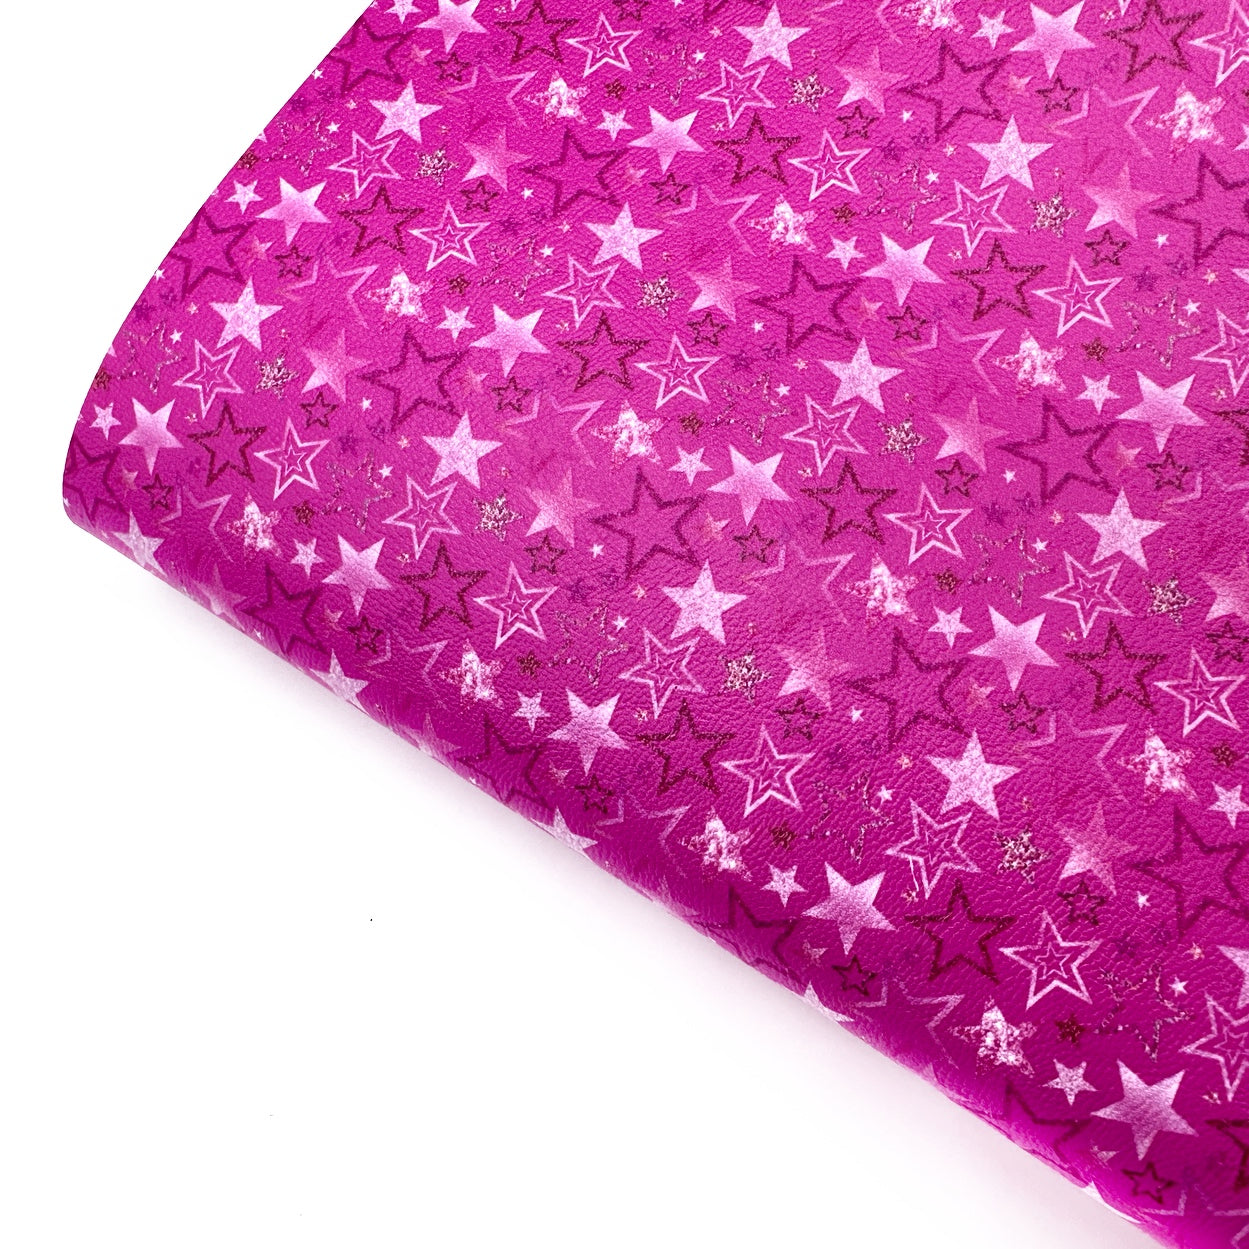 Cosmic Cowgirl Premium Faux Leather Fabric Sheets